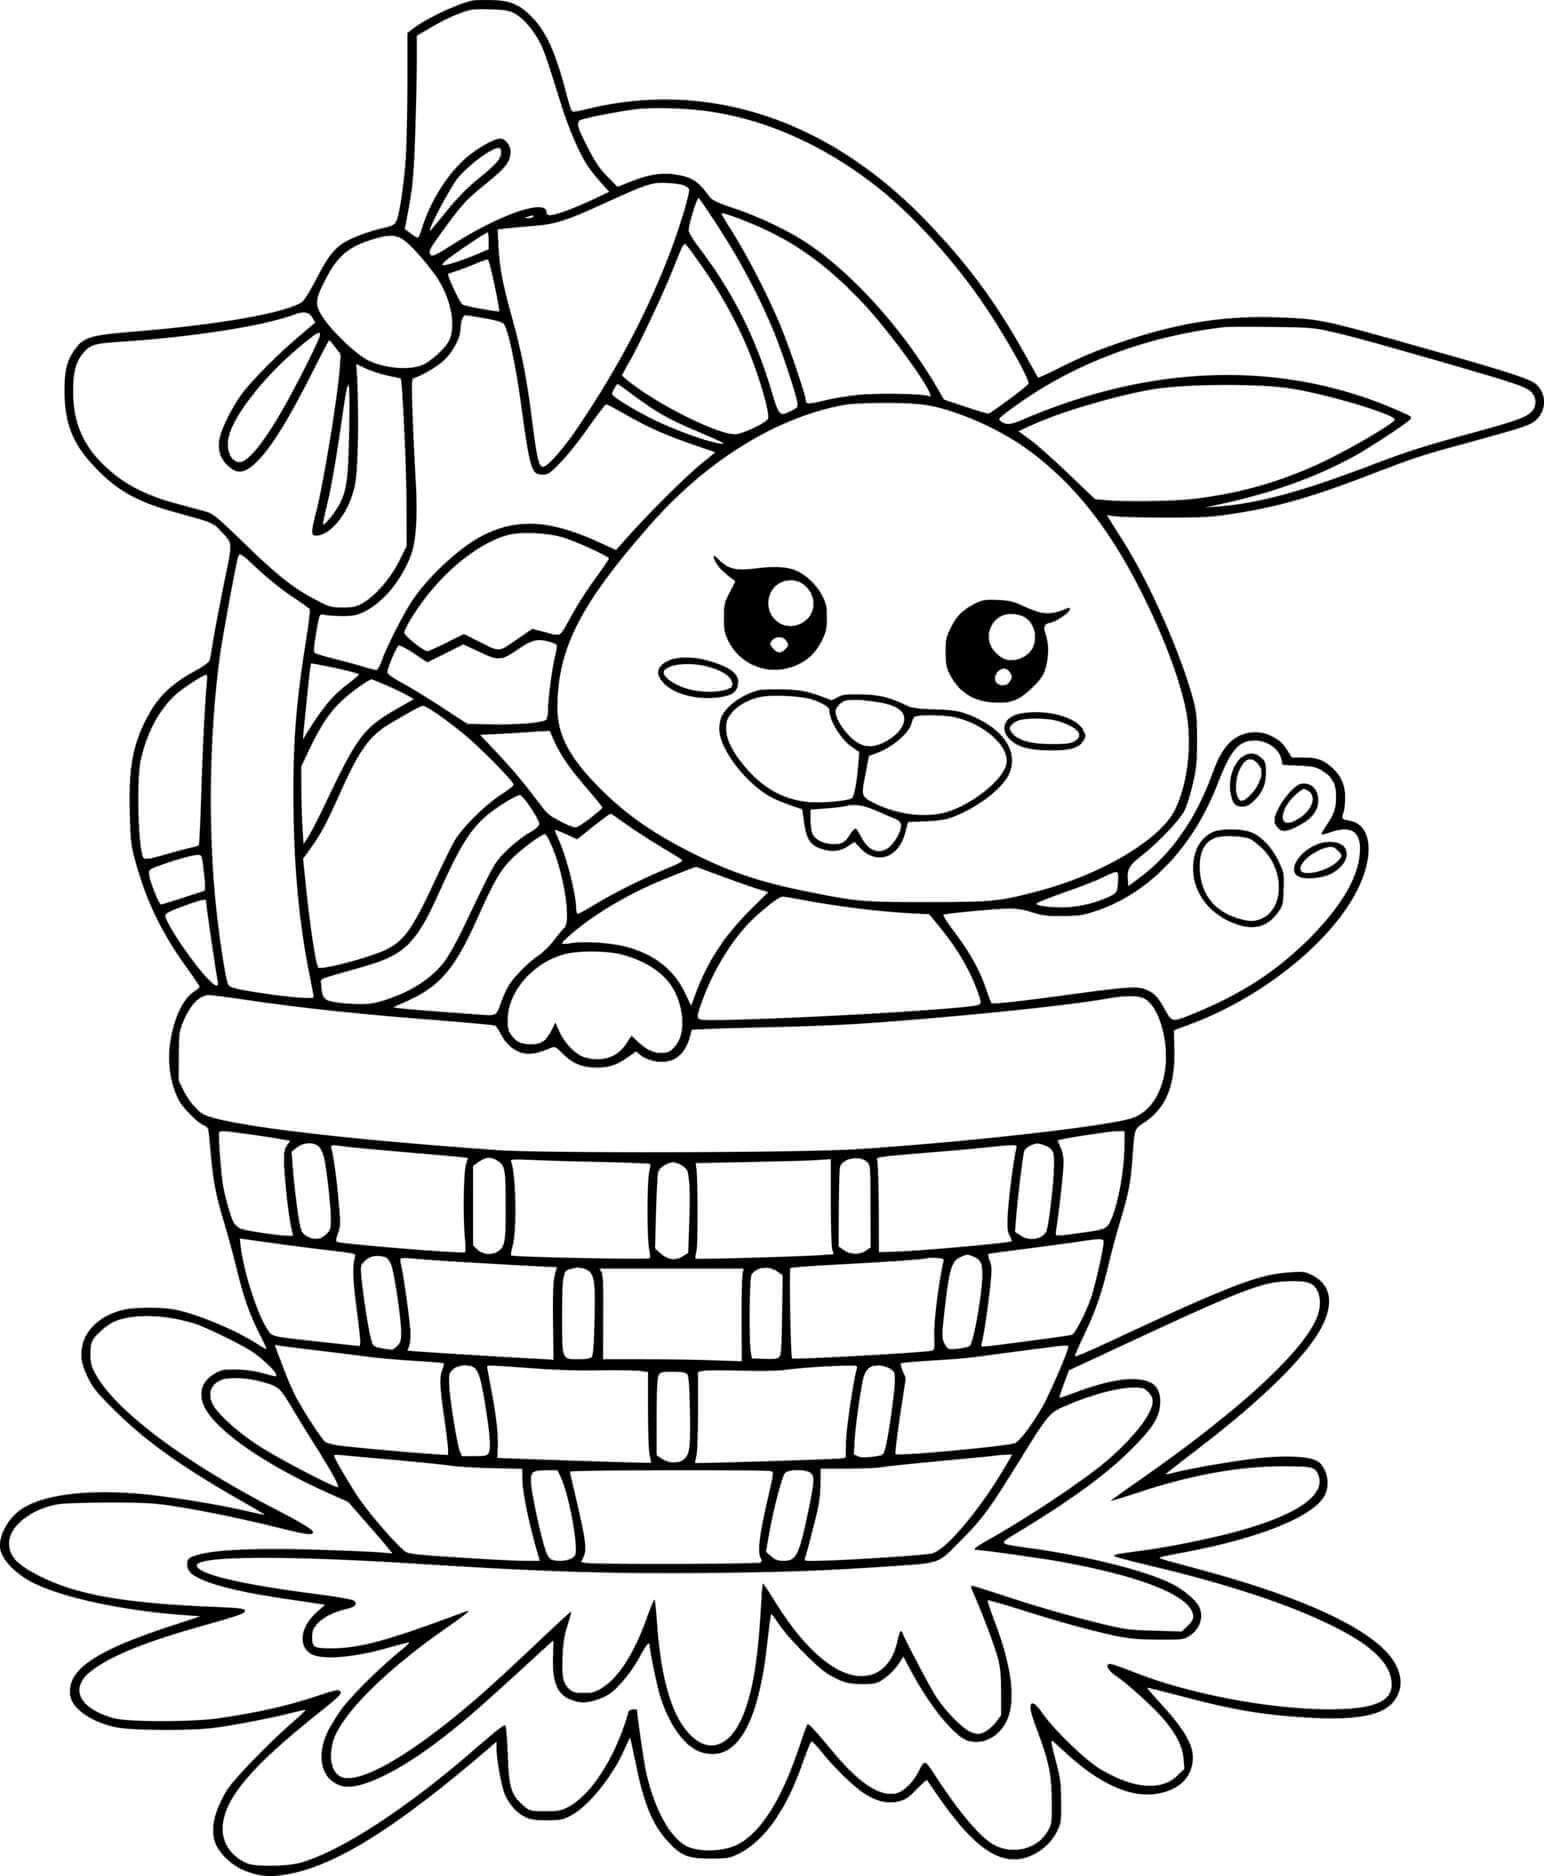 Easter Bunny In The Basket Shaking Its Hand Coloring Page